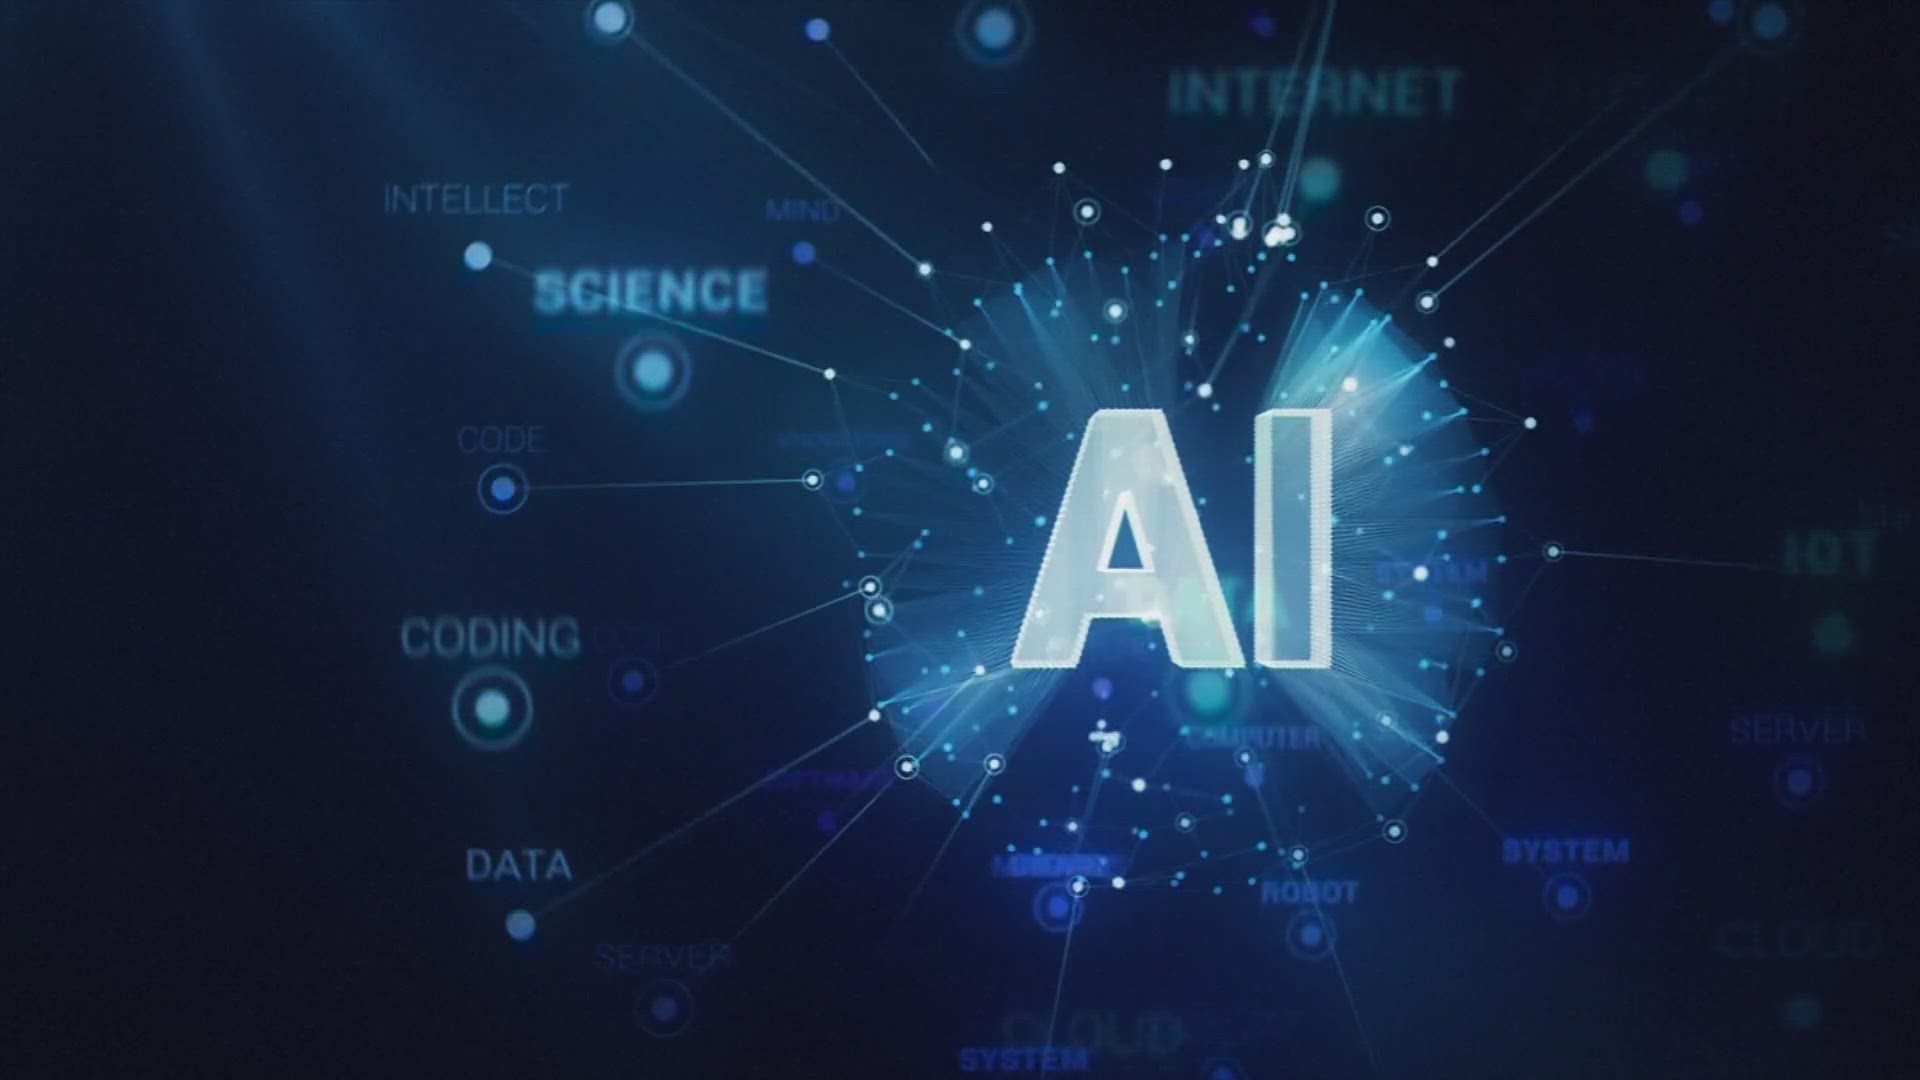 The first time AI was used by the Republican Party in a political ad was after President Joe Biden announced his re-election campaign.